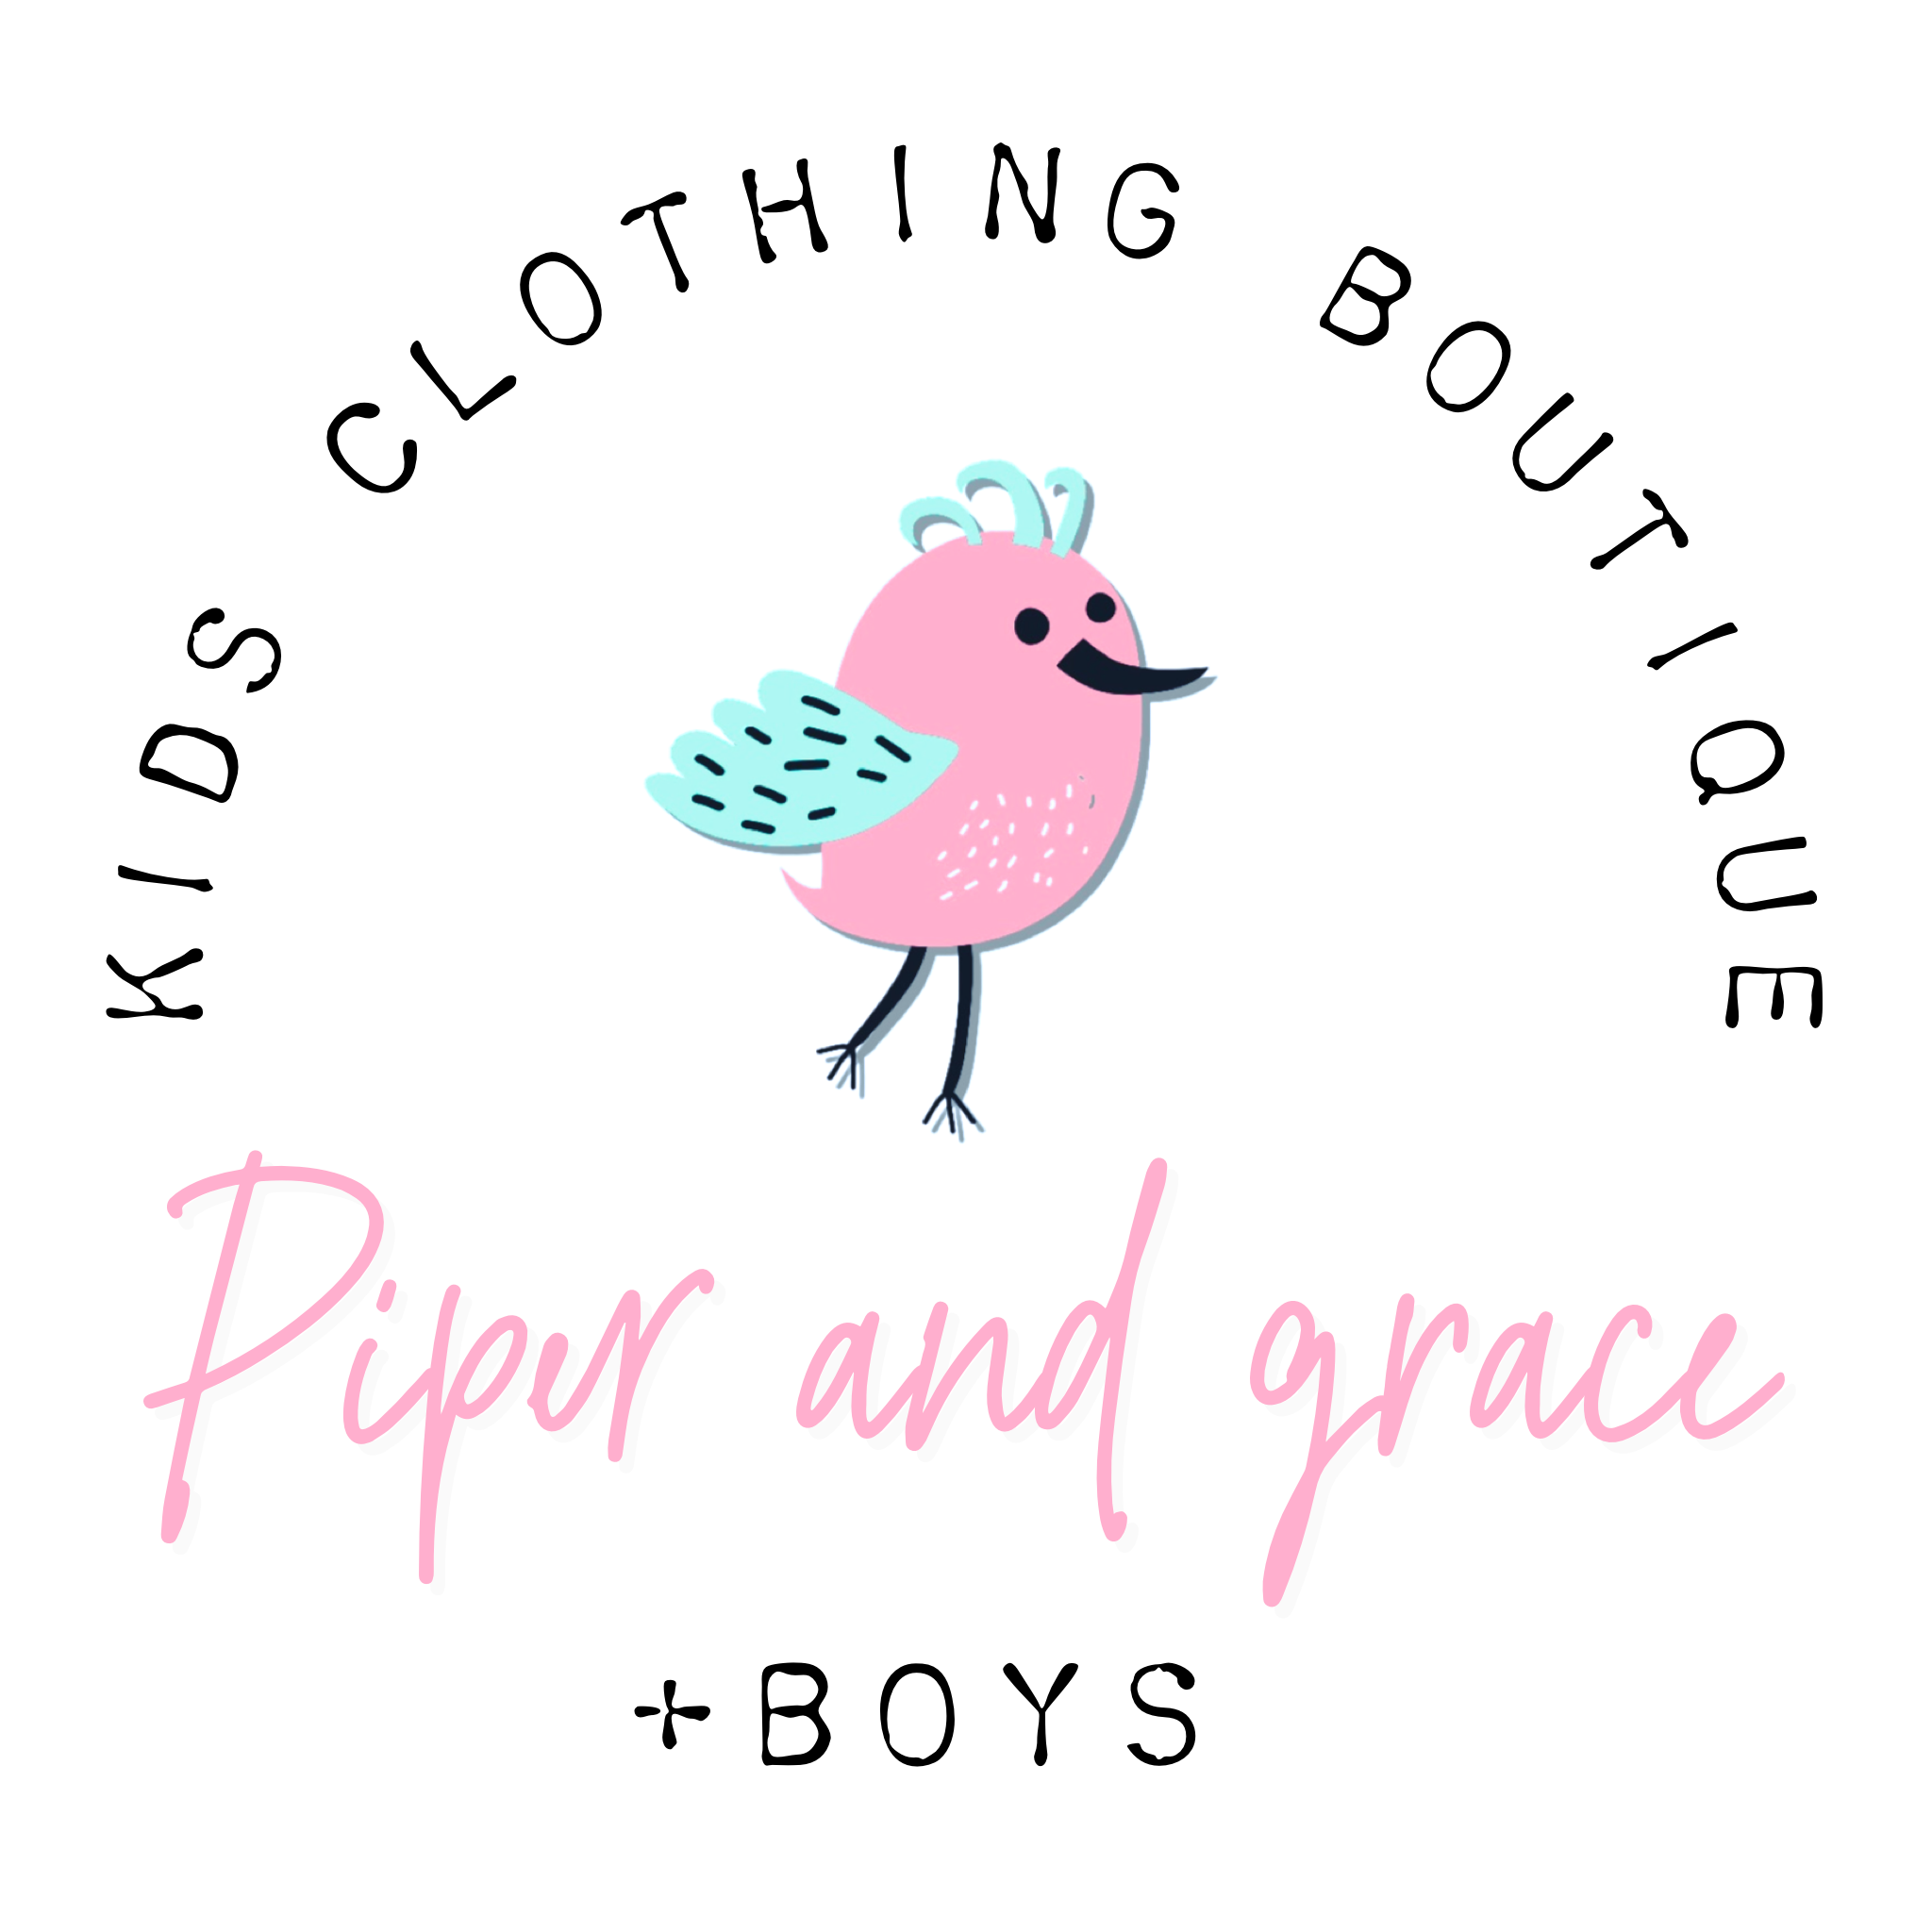 Piper and Grace Kids Apparel